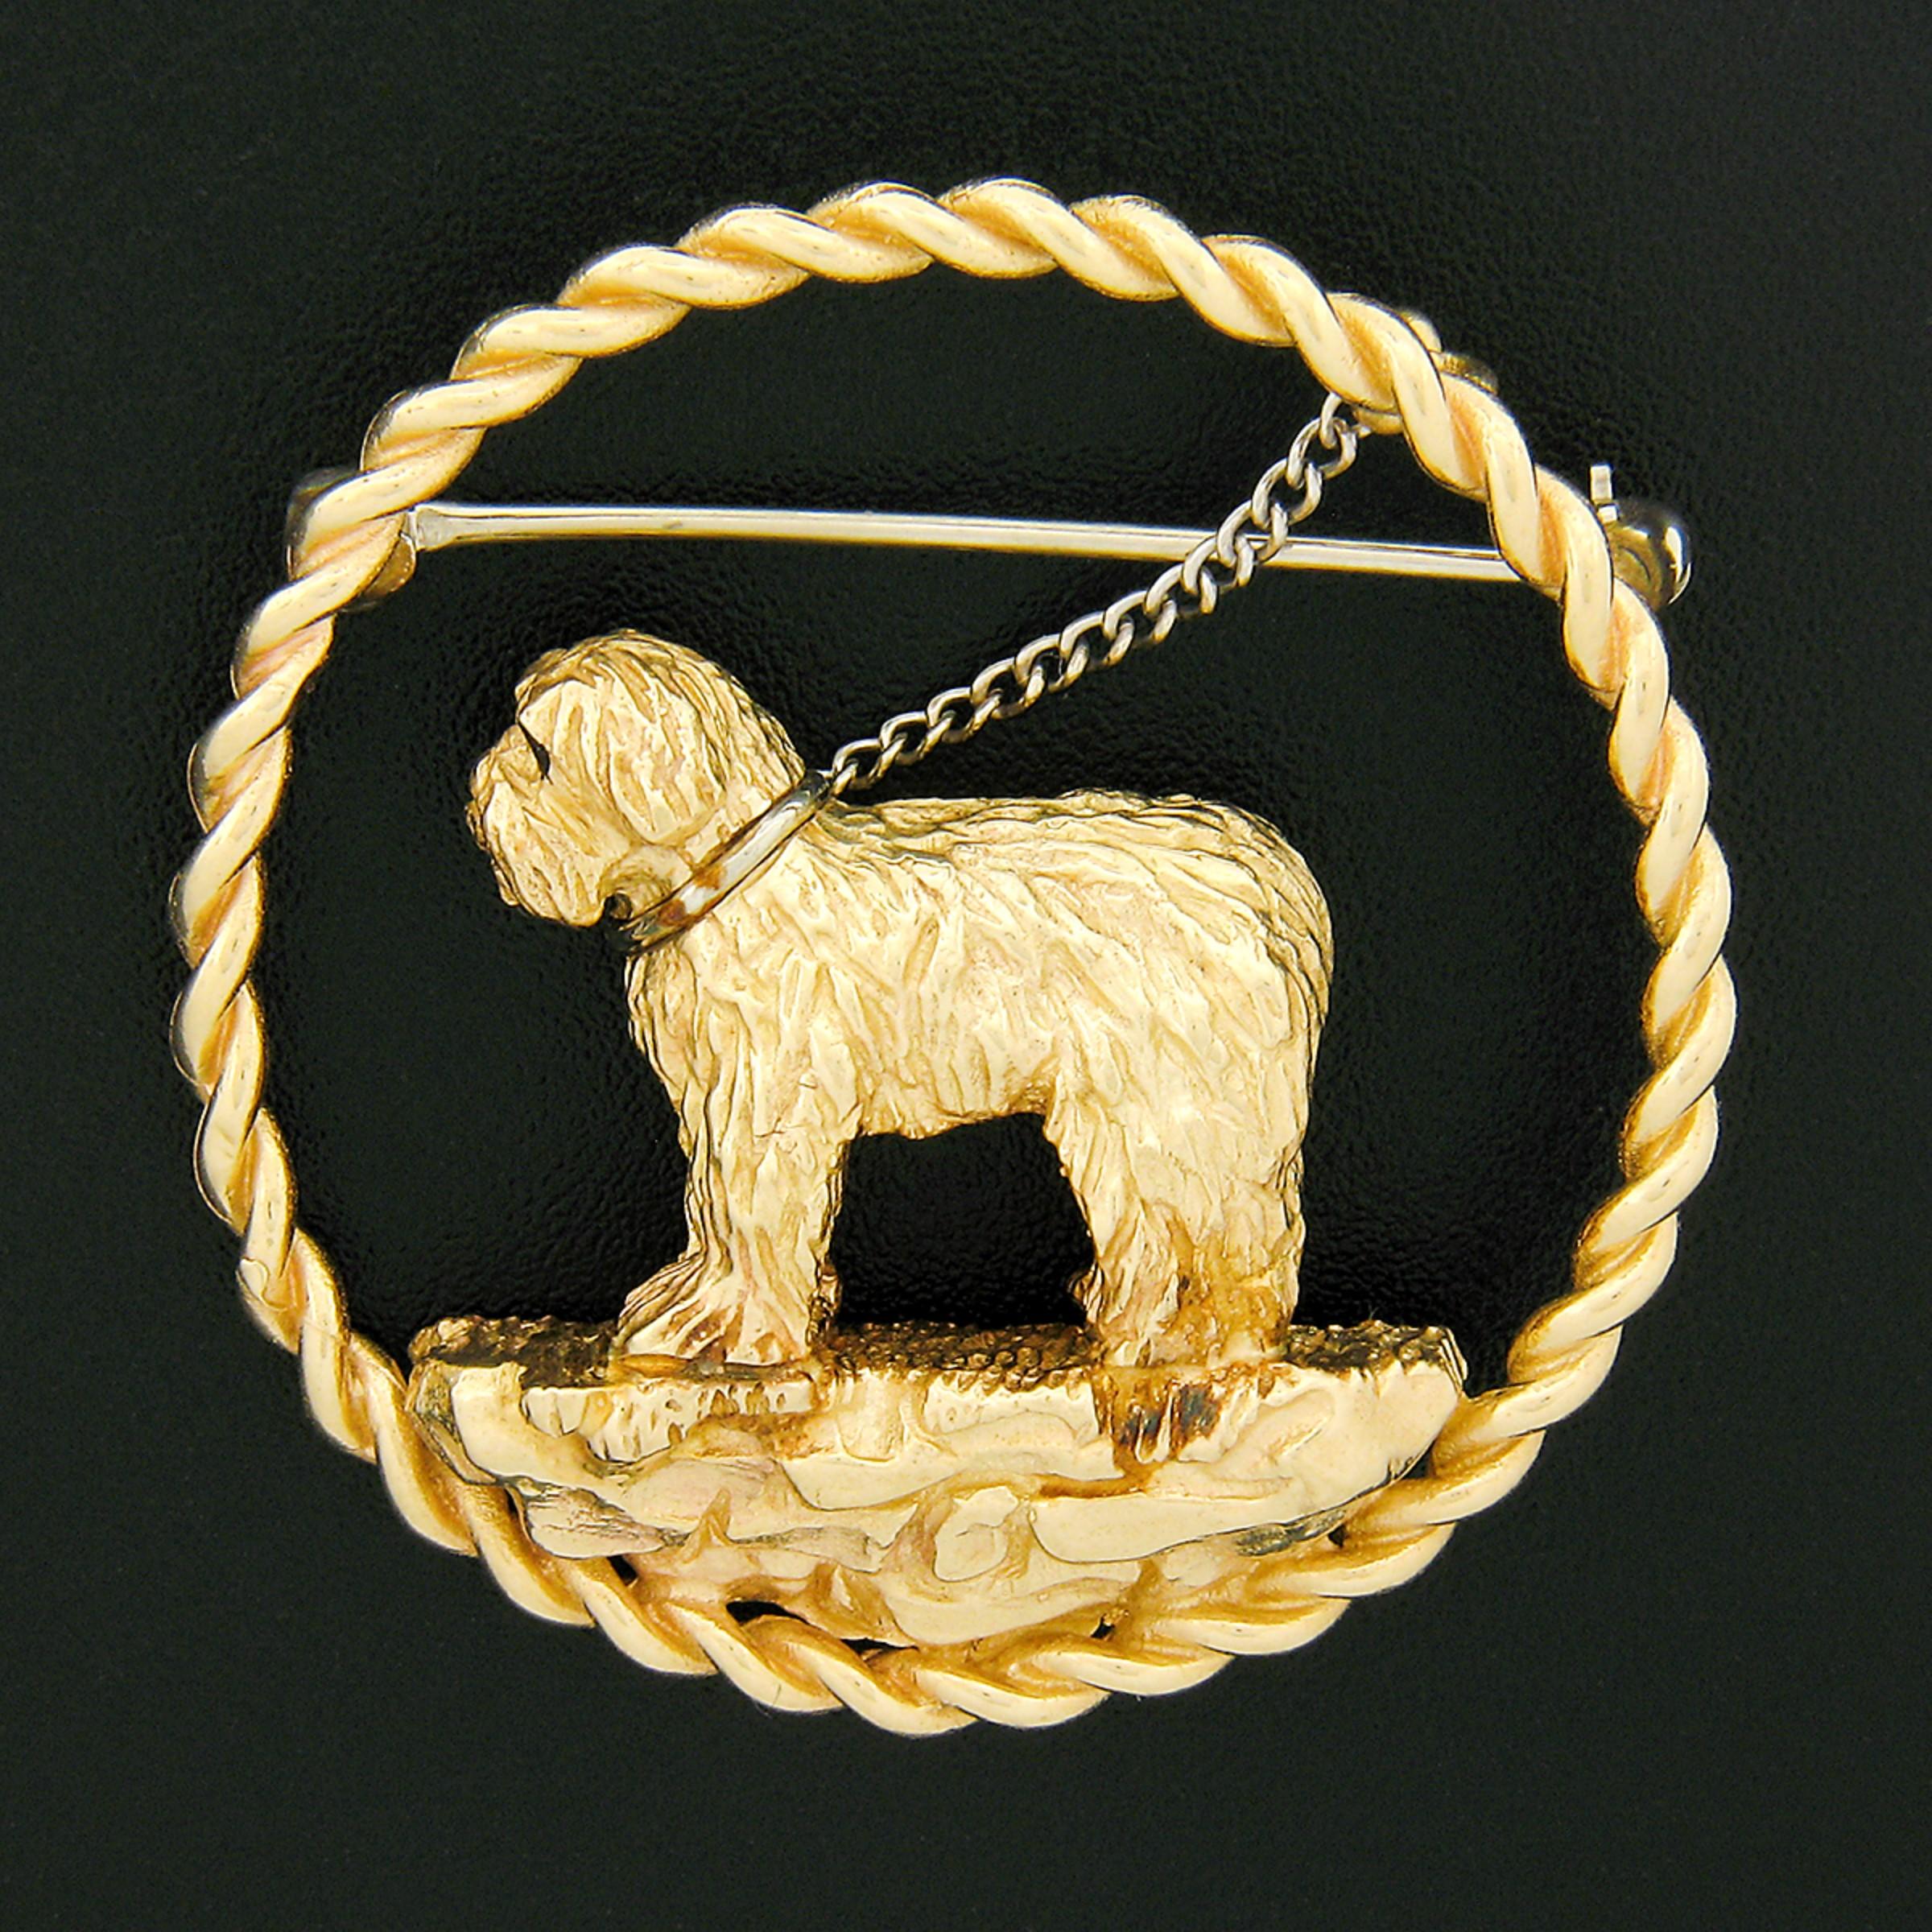 This outstanding vintage pin/brooch is crafted in solid 14k yellow gold and features an adorable Maltese dog standing on a ledge in a lovely open circular frame. This heavy and well made brooch pin shows absolutely incredible detail throughout that